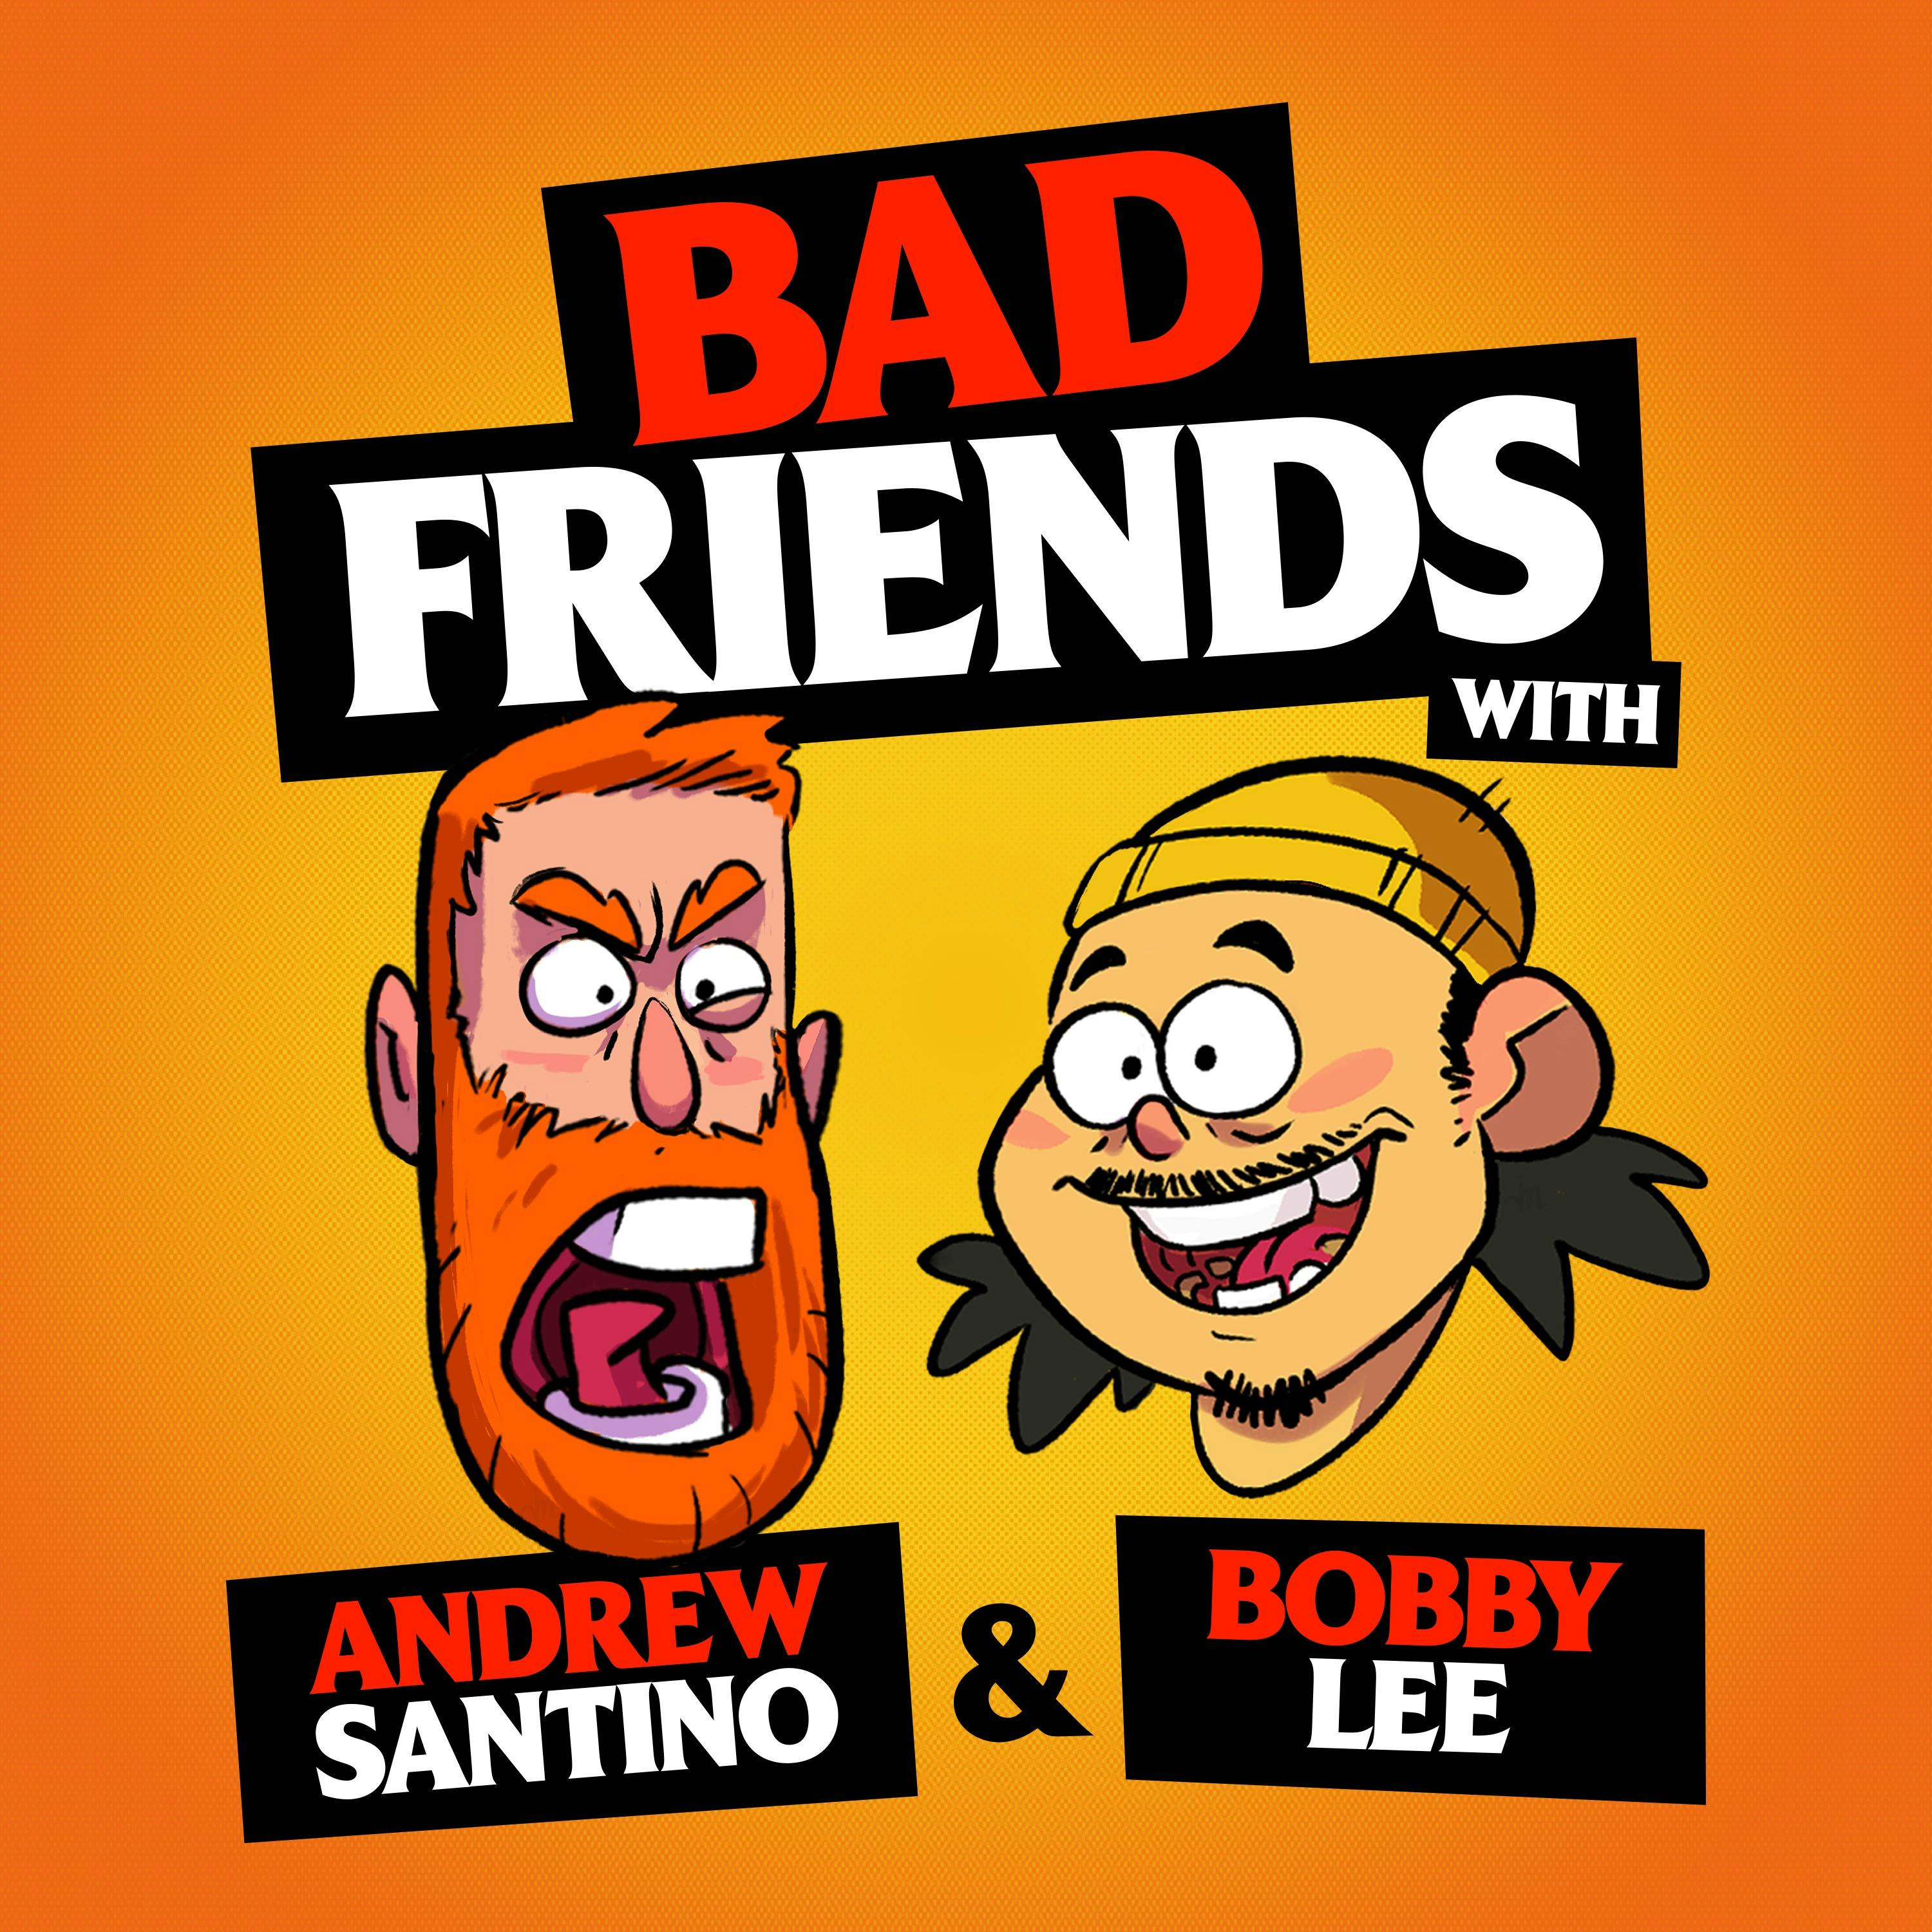 BEST OF 2020! by Andrew Santino and Bobby Lee